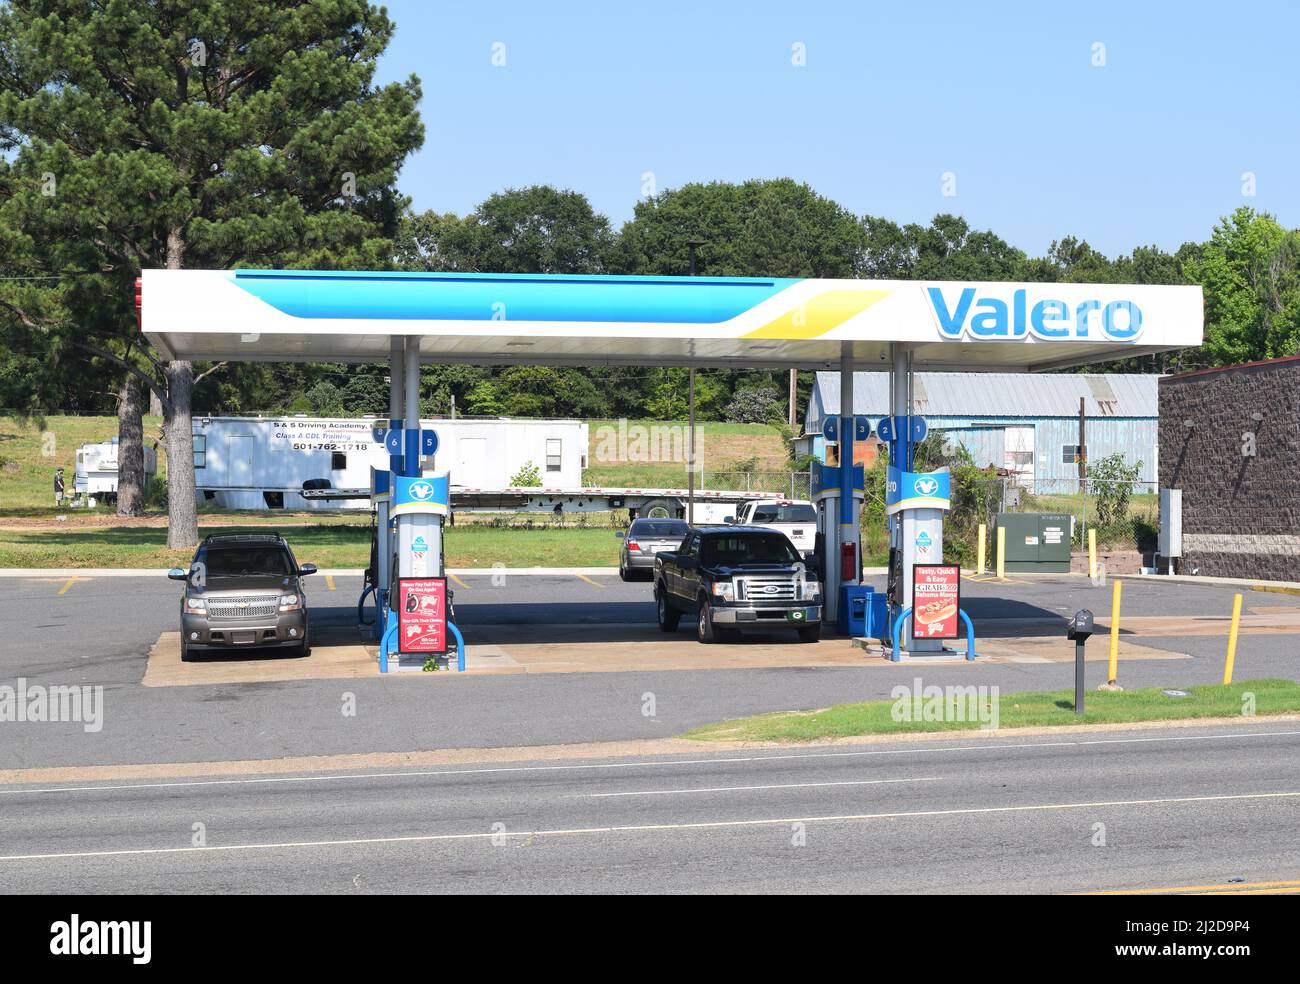 An SUV and pick up truck parked under the awning of a Valero gas station in Rockport, Arkansas Stock Photo